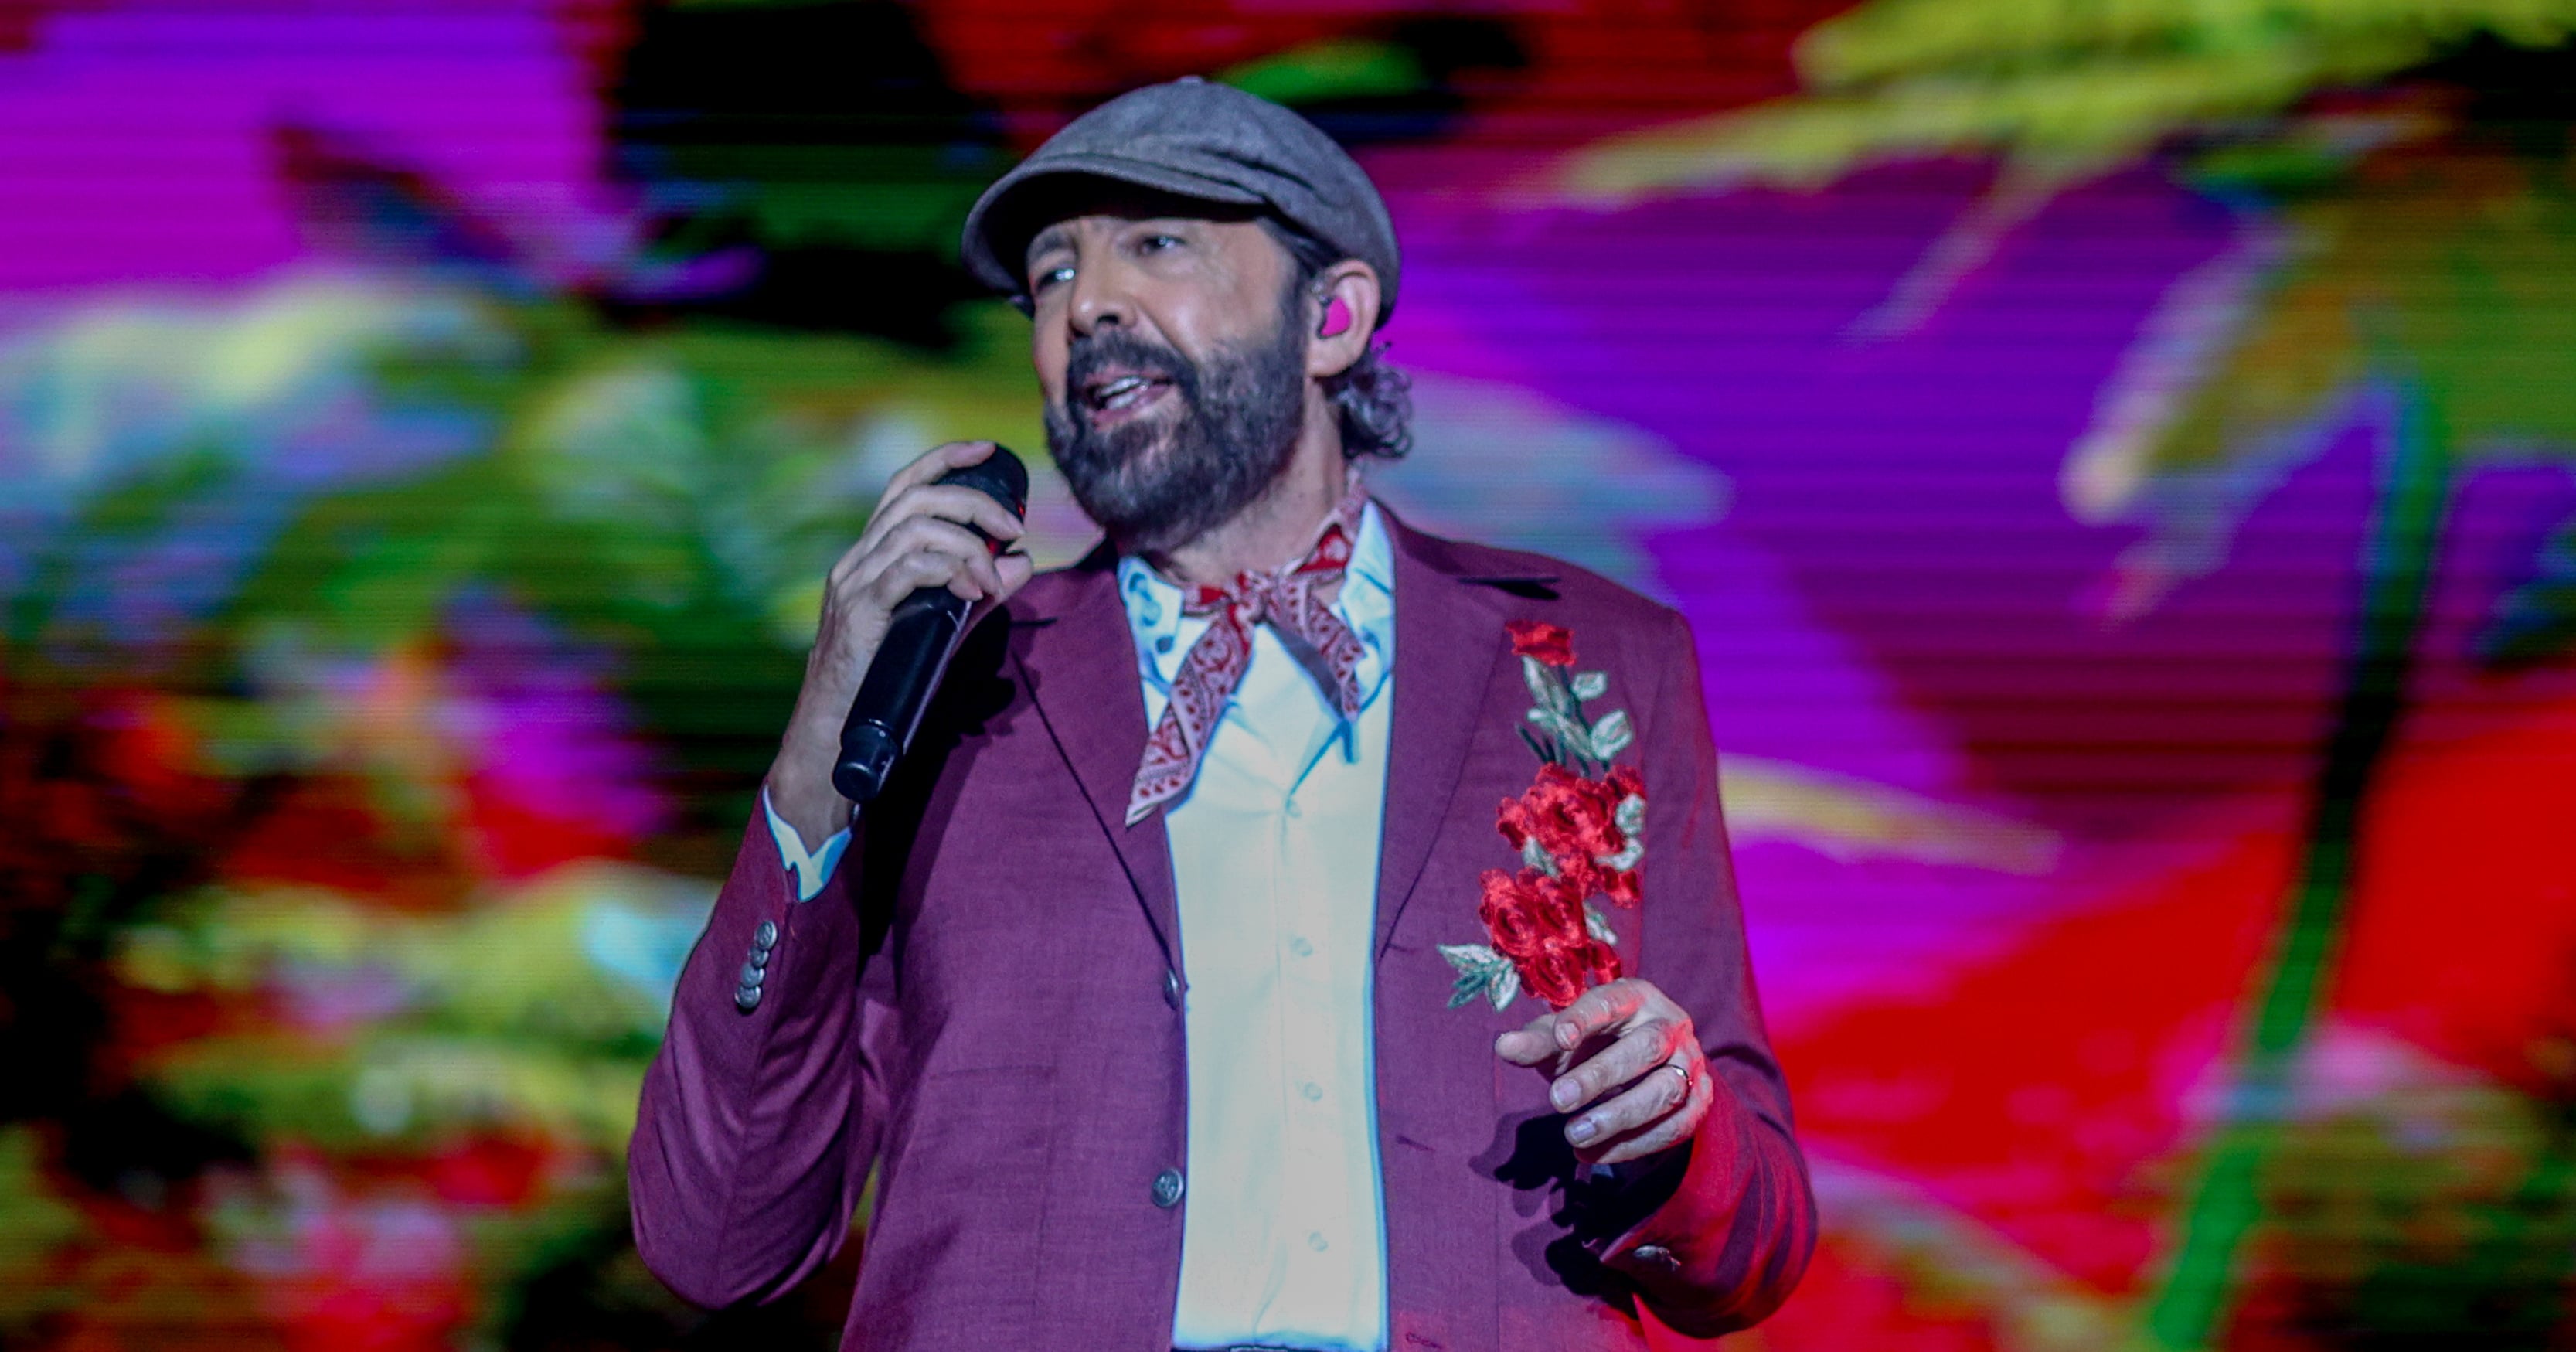 Innovating Latin Music Is What's Made Juan Luis Guerra a Legend & His New EP "Radio Güira" Is Proof